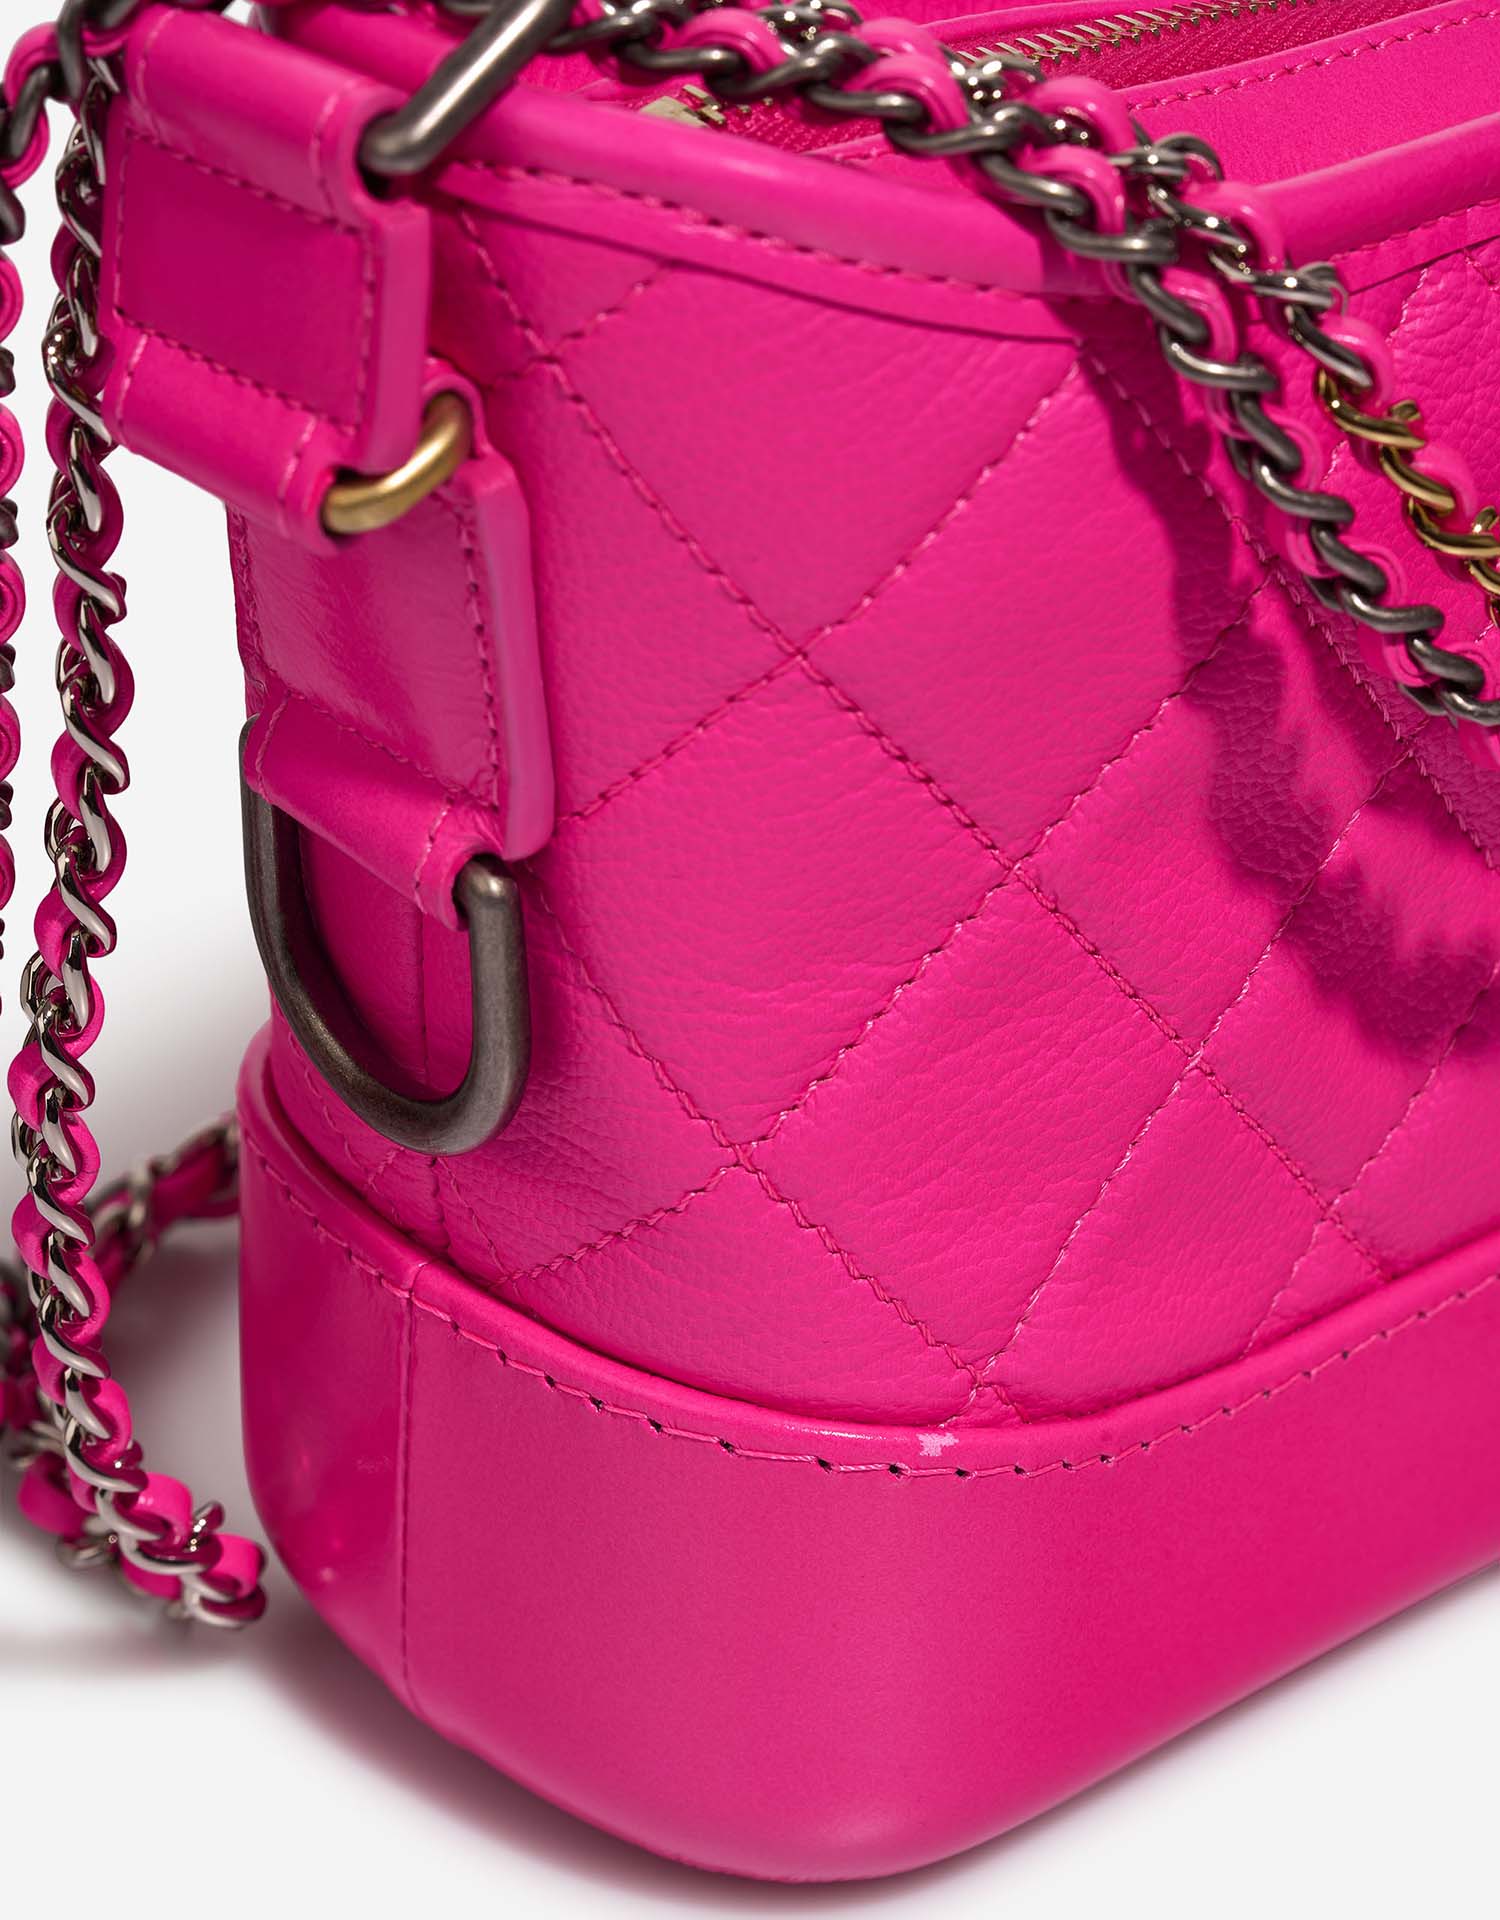 Chanel Gabrielle Small NeonPink signs of wear | Sell your designer bag on Saclab.com